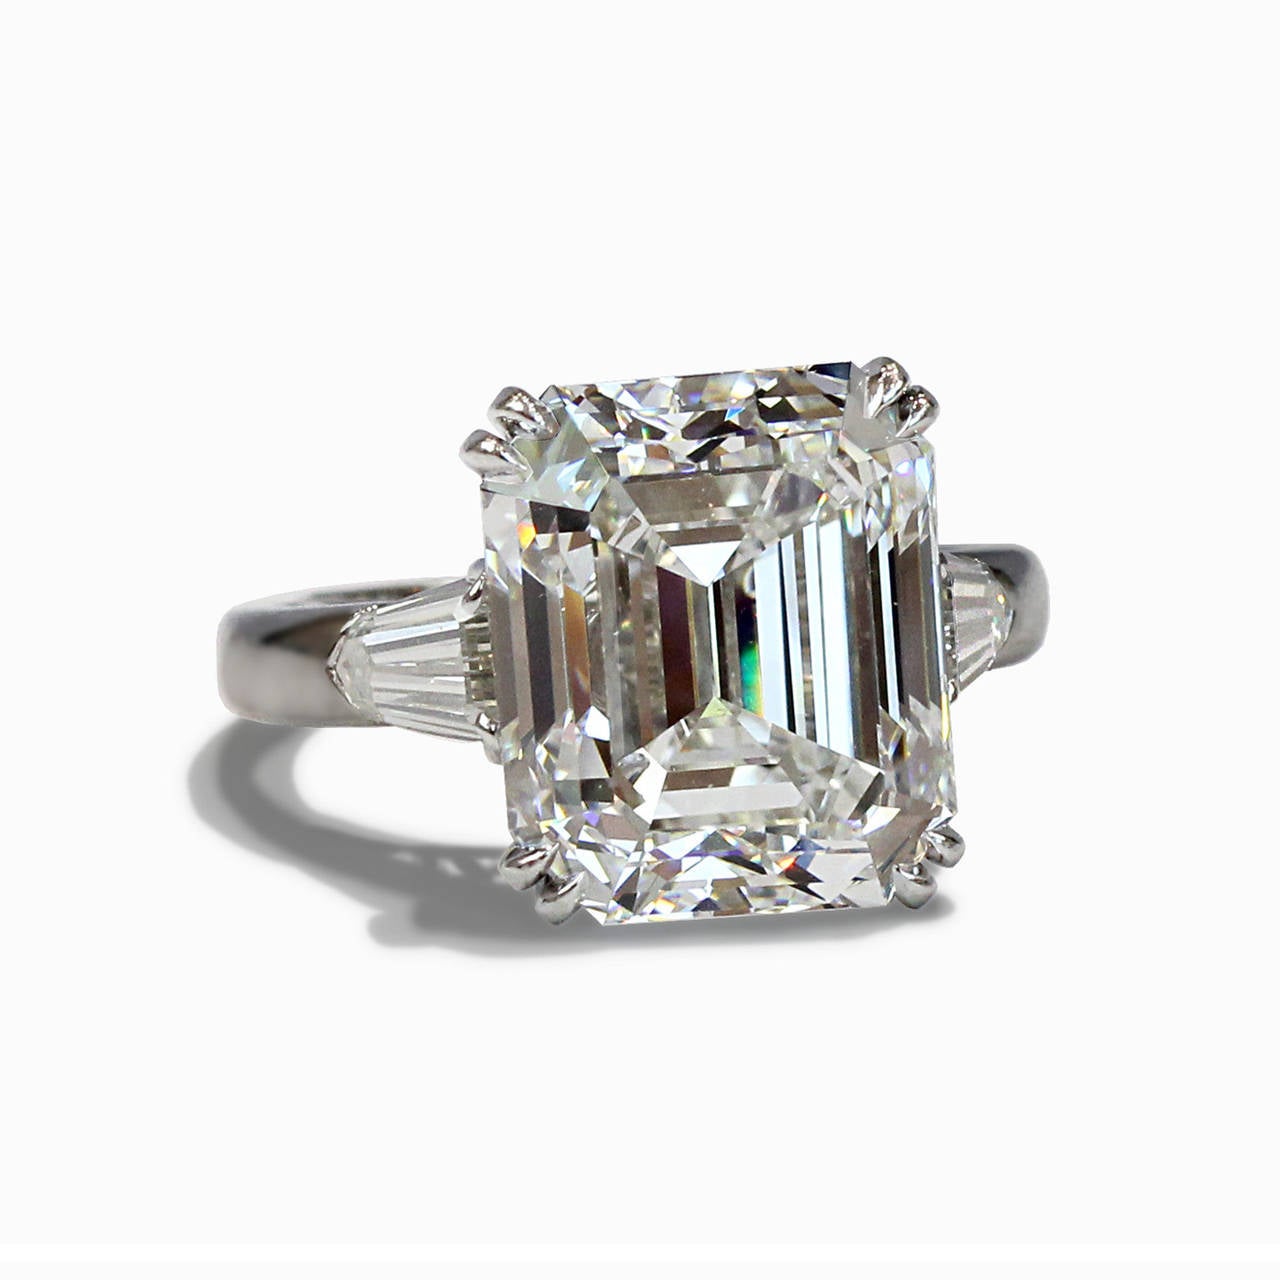 This exquisite platinum ring consists of 1 emerald cut diamond weighing 13.54cts having a color and clarity of GVS1 accompanied with a GIA Certificate. The center stone is flanked by 2 tapered baguette diamonds having a total weight of